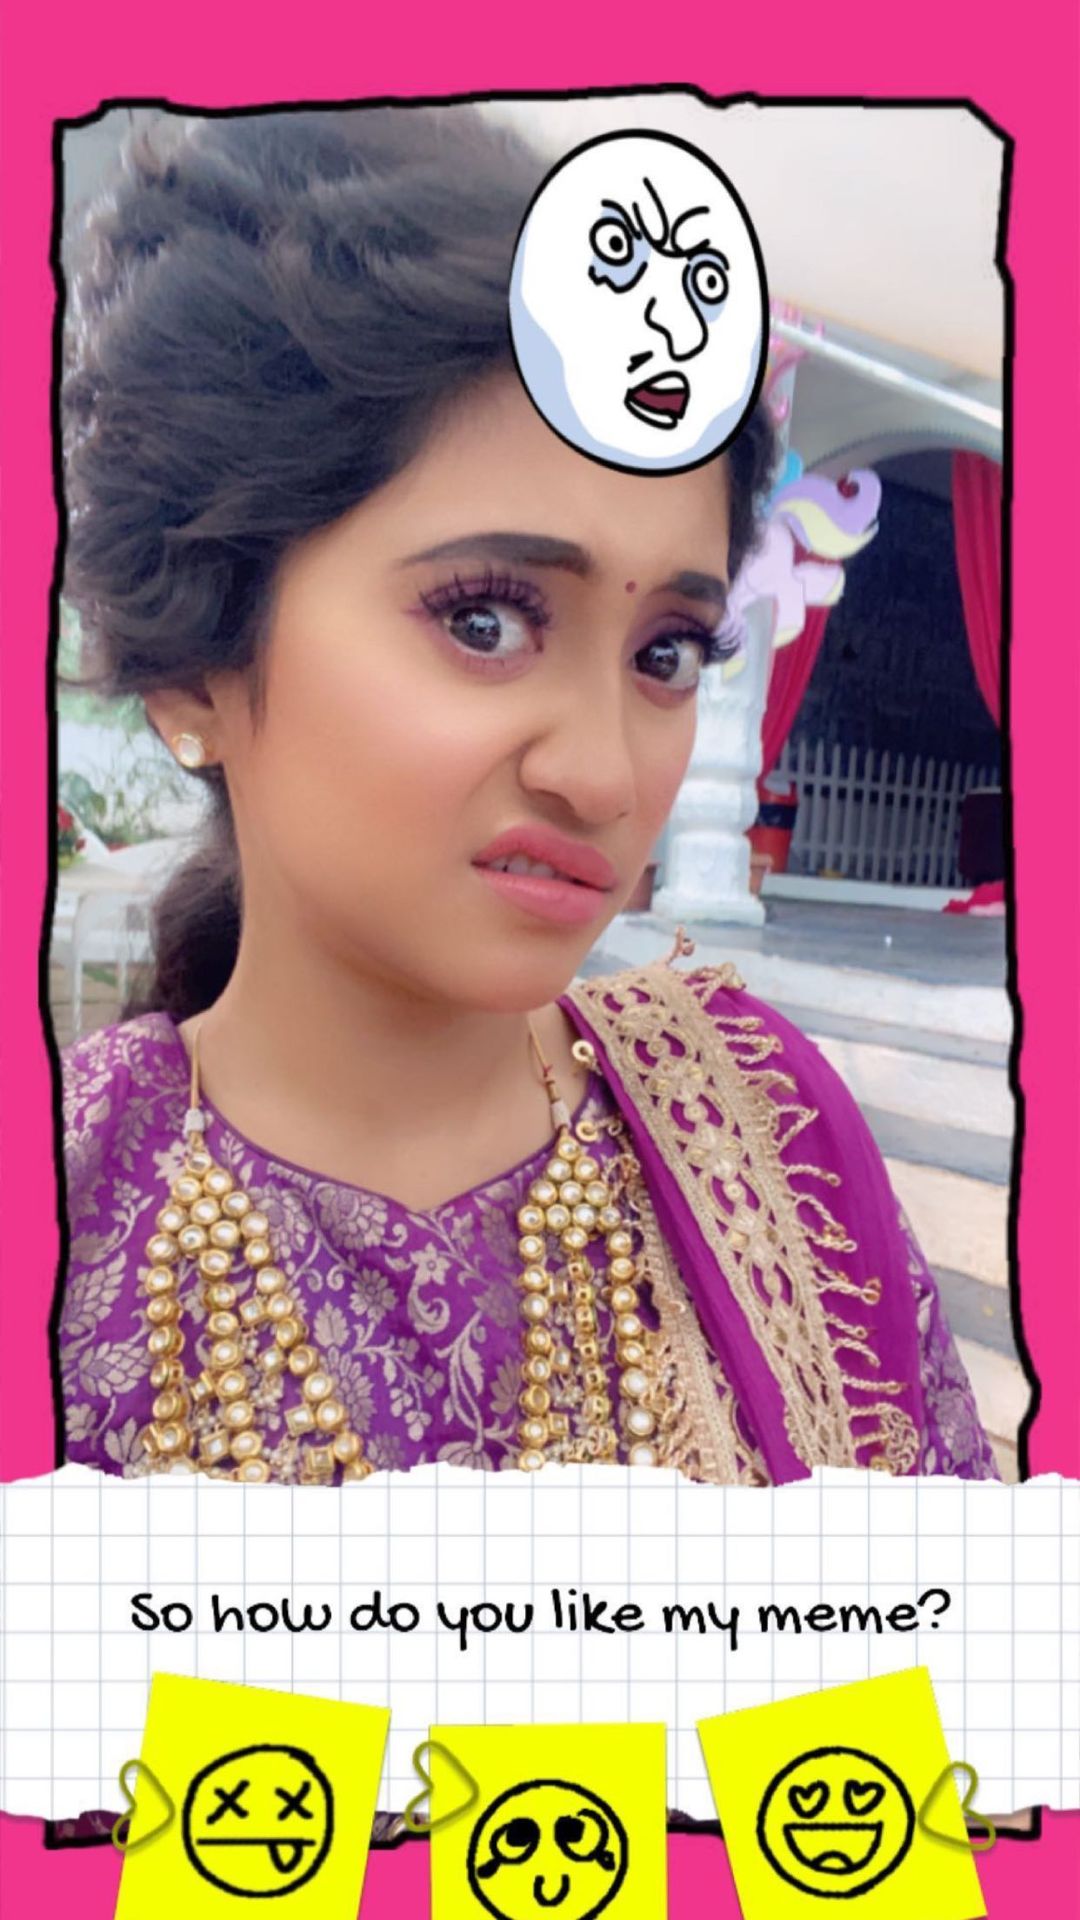 Yeh Rishta Kya Kehlata Hai actress Shivangi Joshi is the queen of expressions, find out here 1